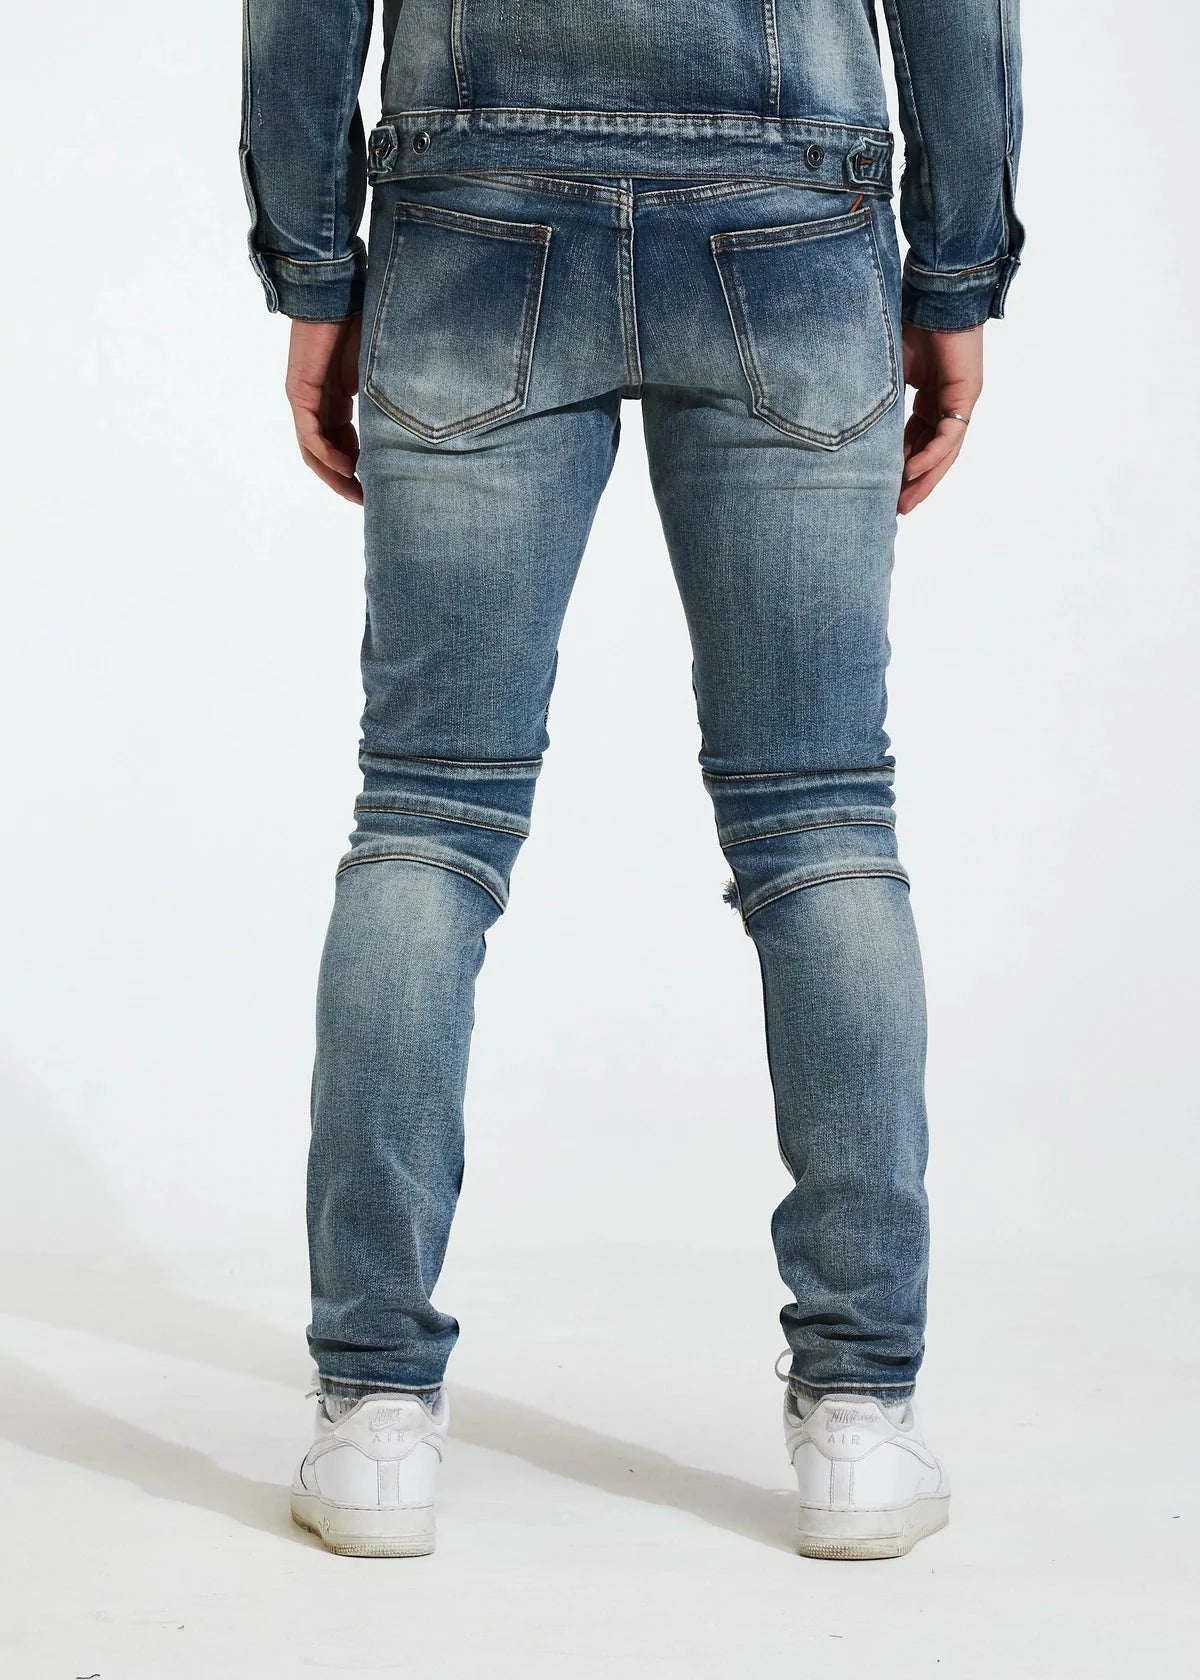 CRYSP DENIM DISTRESSED MOTO JEANS WITH RIBBED KNEE BLUE WASH - CRYSP122-13